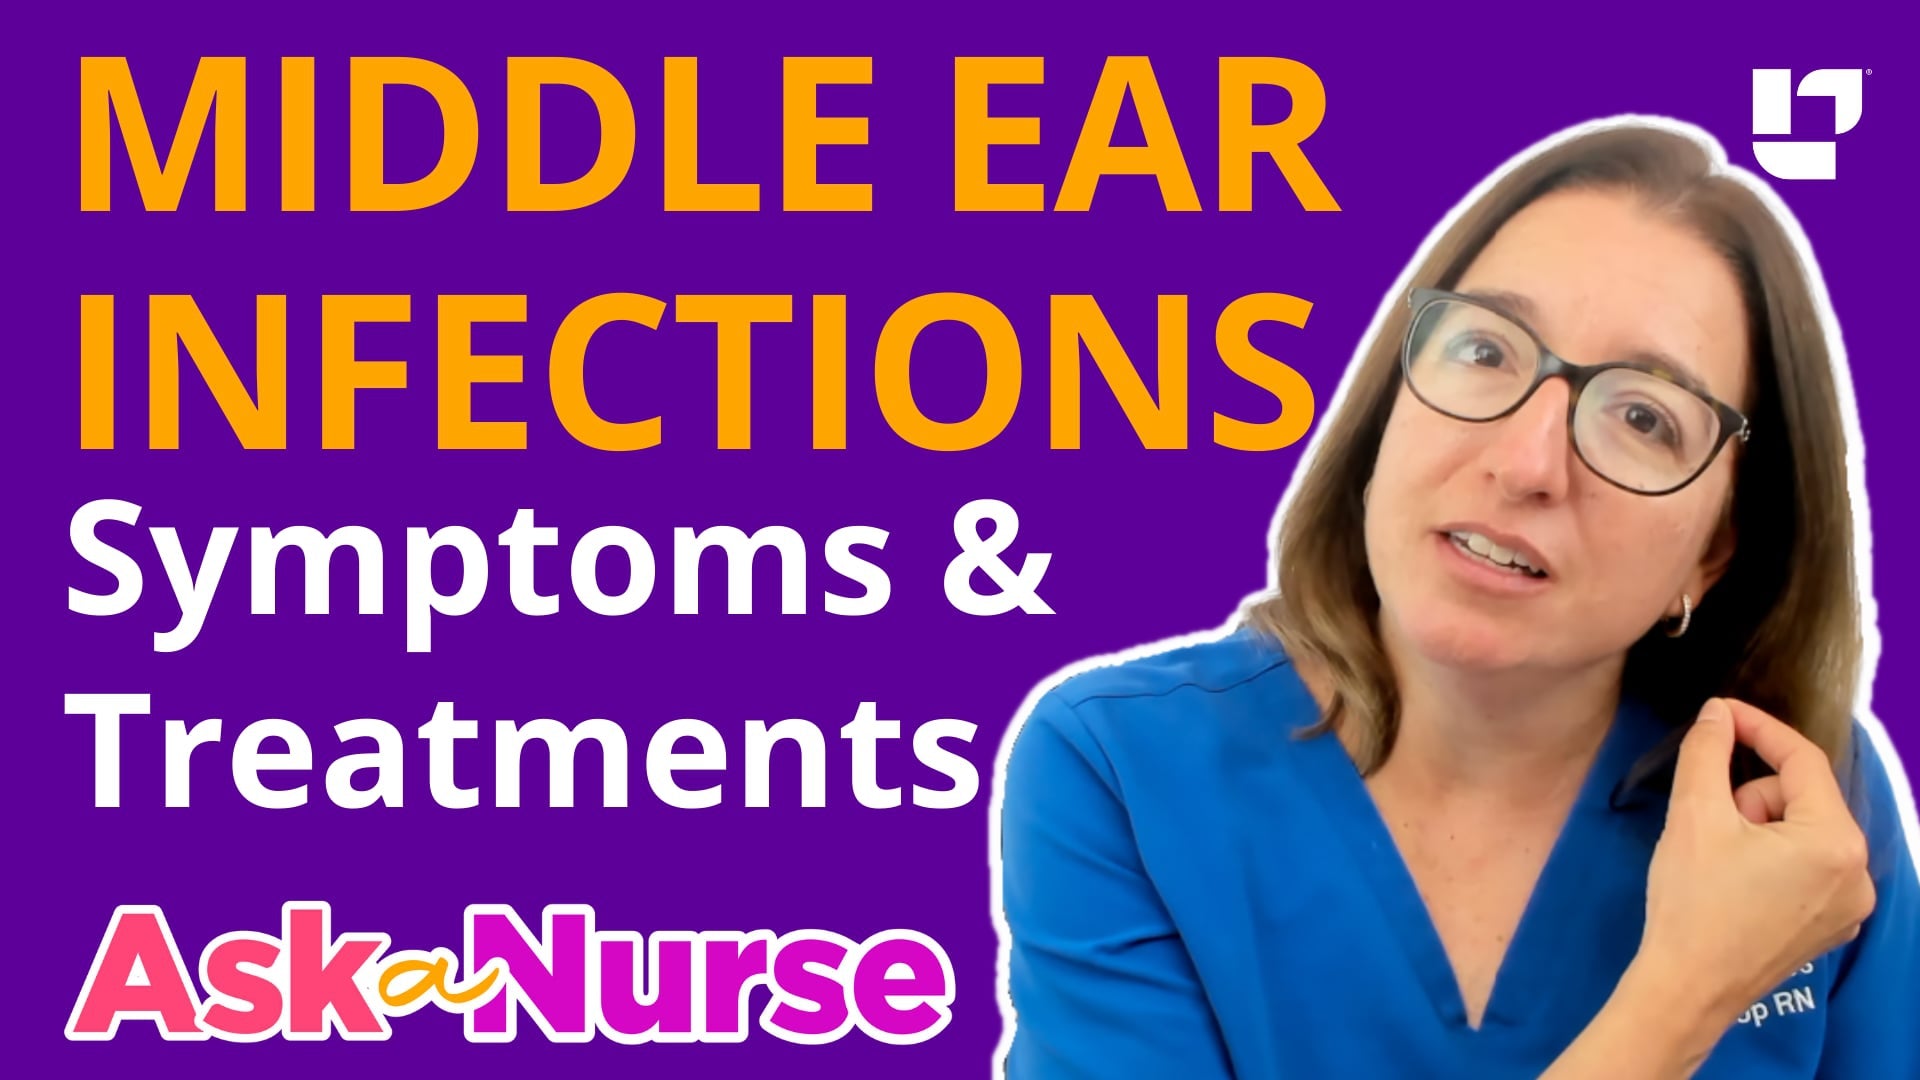 Ask a Nurse - Middle Ear Infections - LevelUpRN